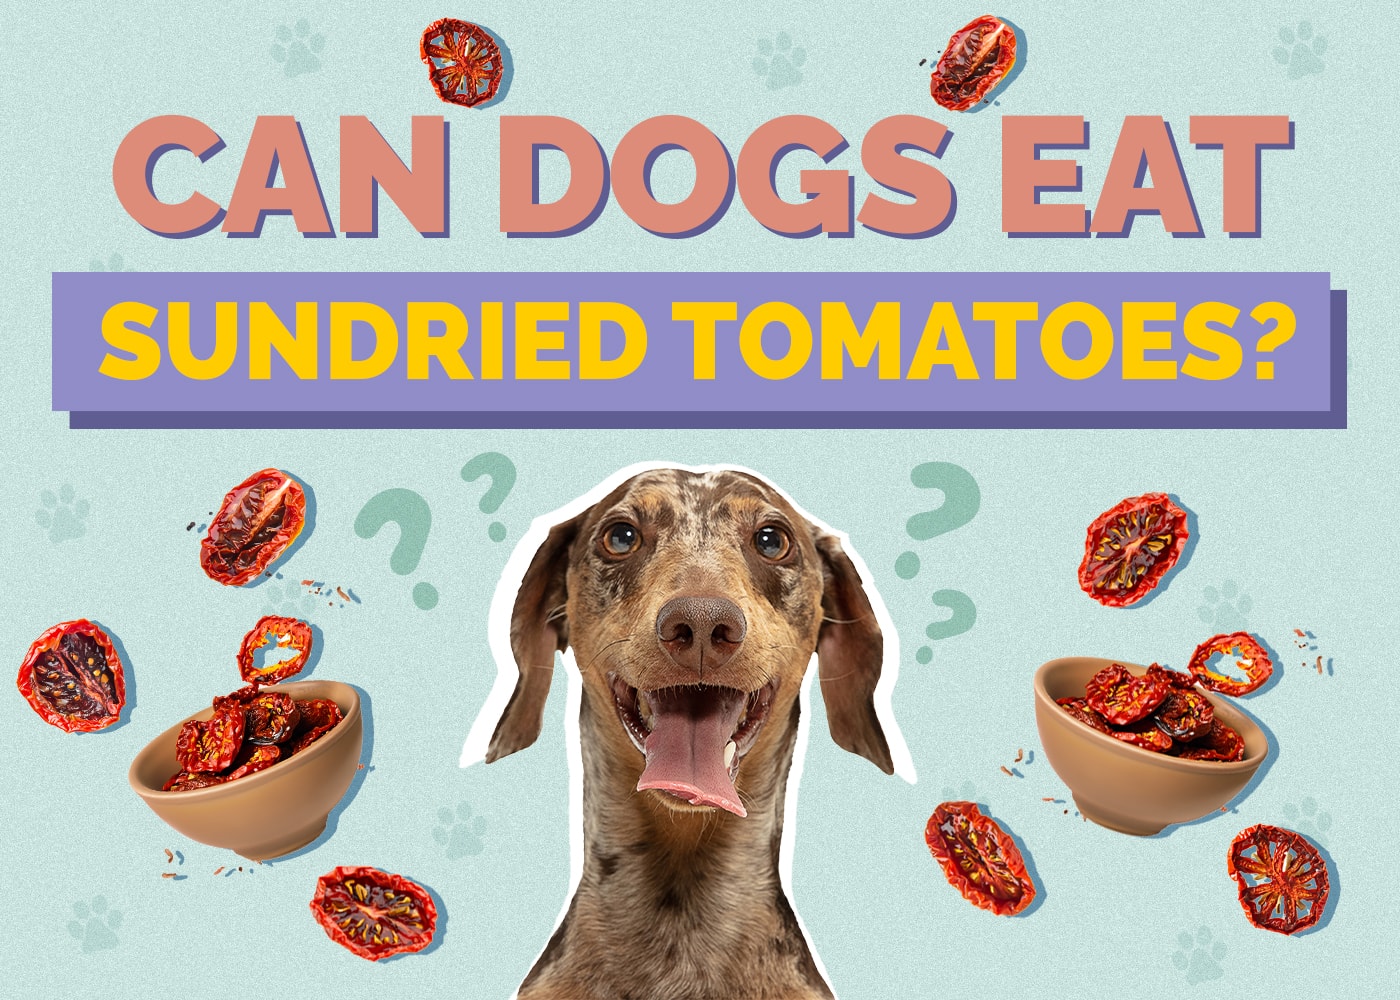 Can Dogs Eat Sundried Tomatoes